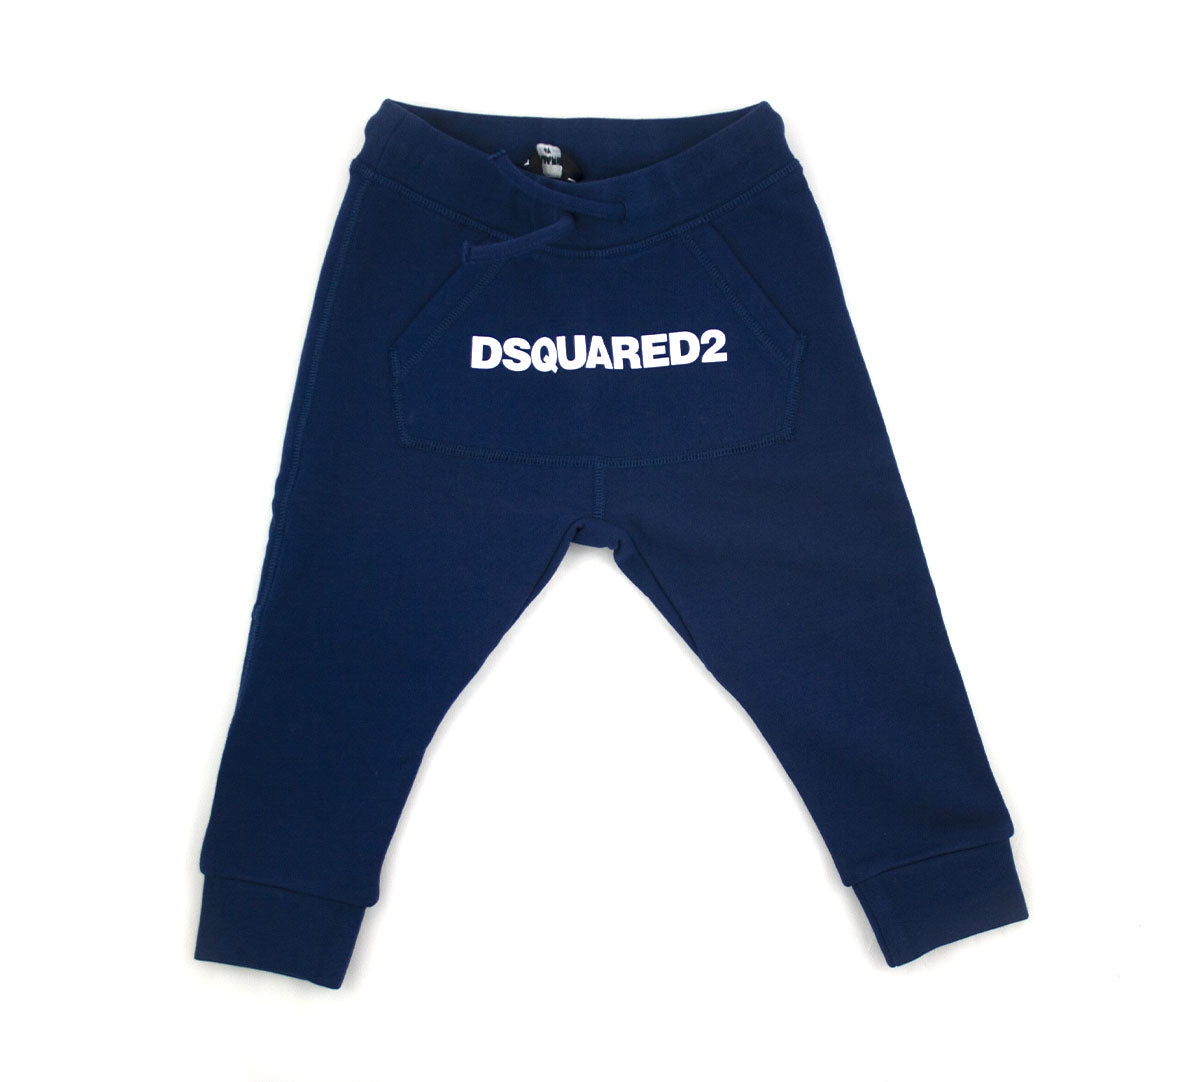 Dsquared2 Boy blue sports trousers